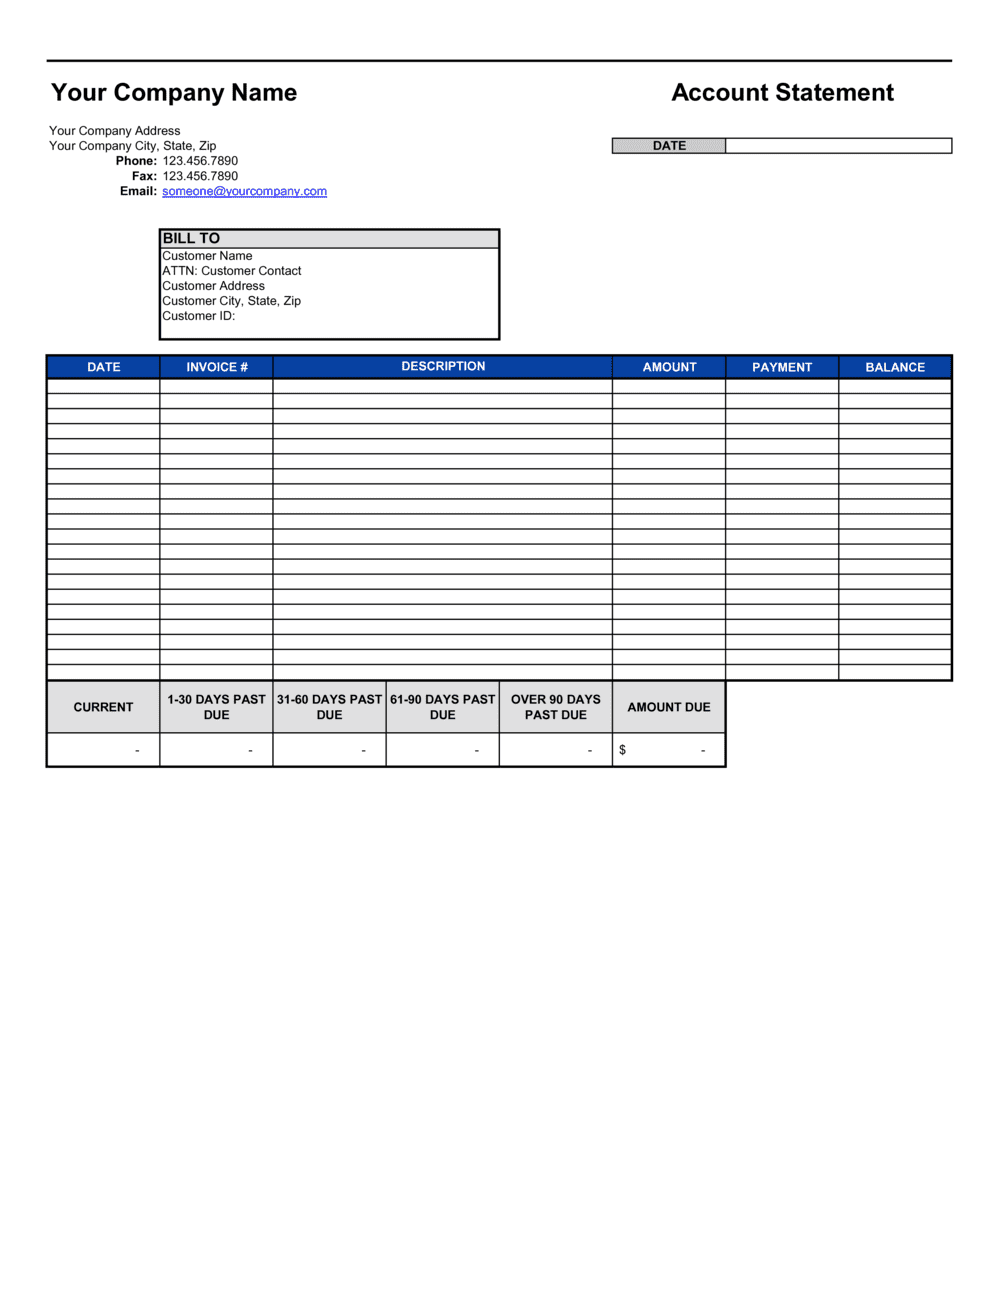 Accounts Receivable Template  by Business-in-a-Box™ Within Accounts Payable Checklist Template Throughout Accounts Payable Checklist Template